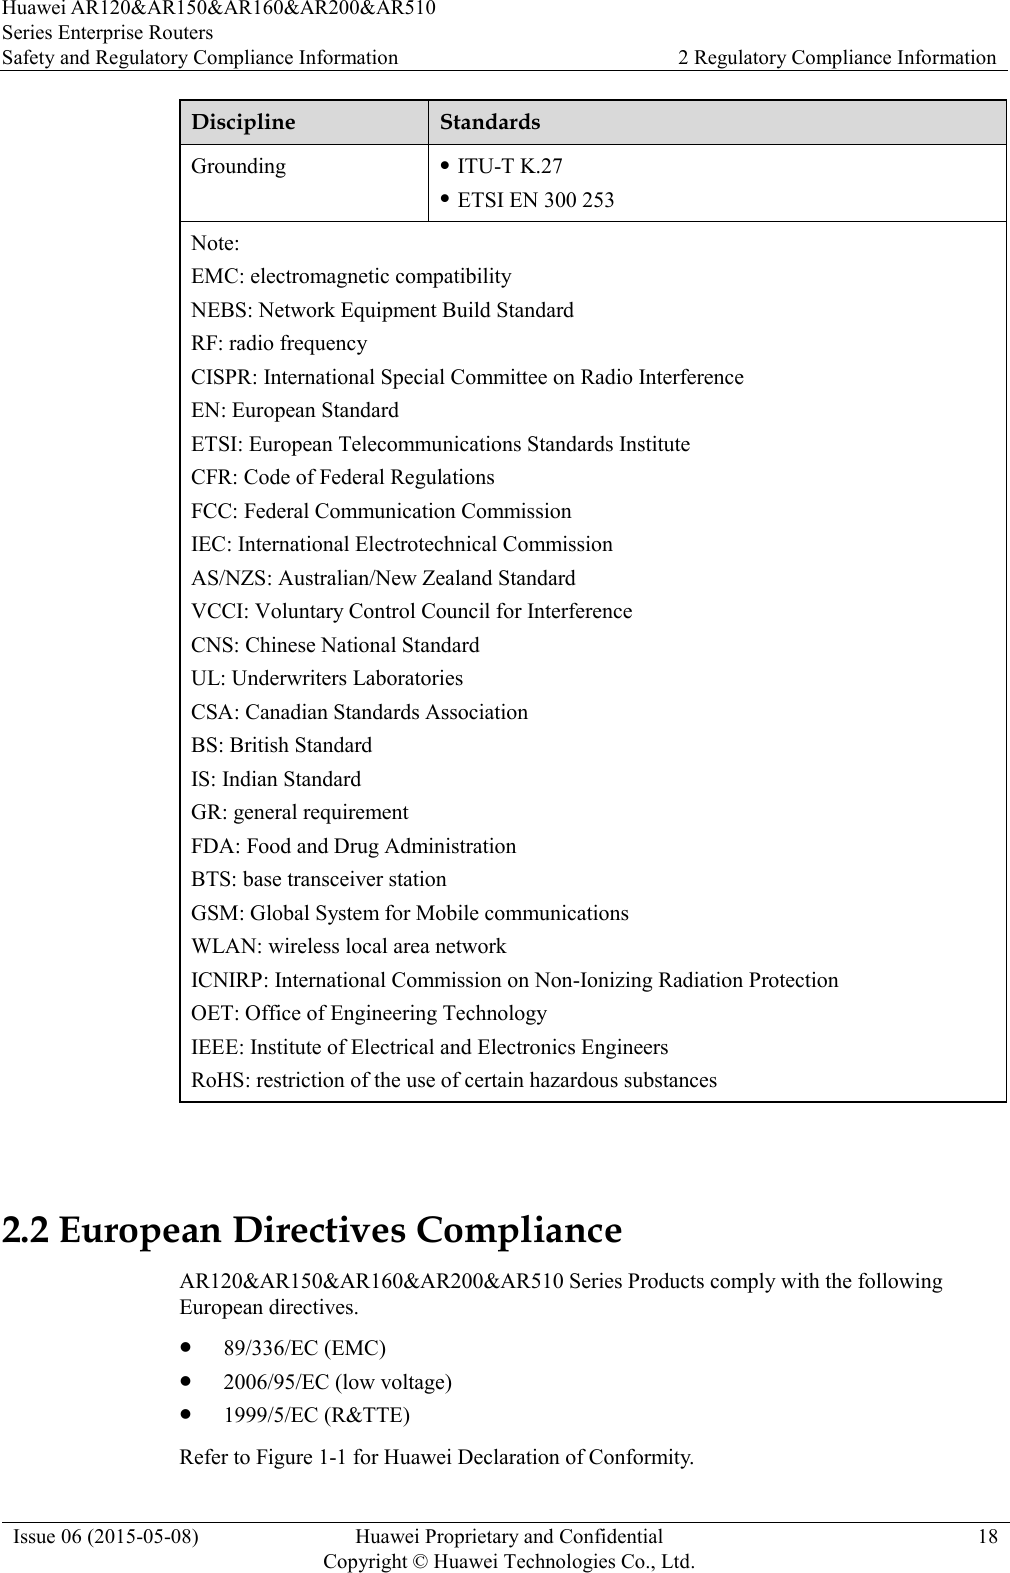 Huawei AR120&amp;AR150&amp;AR160&amp;AR200&amp;AR510 Series Enterprise Routers Safety and Regulatory Compliance Information 2 Regulatory Compliance Information  Issue 06 (2015-05-08) Huawei Proprietary and Confidential           Copyright © Huawei Technologies Co., Ltd. 18  Discipline Standards Grounding  ITU-T K.27  ETSI EN 300 253 Note: EMC: electromagnetic compatibility NEBS: Network Equipment Build Standard RF: radio frequency CISPR: International Special Committee on Radio Interference EN: European Standard ETSI: European Telecommunications Standards Institute CFR: Code of Federal Regulations FCC: Federal Communication Commission IEC: International Electrotechnical Commission AS/NZS: Australian/New Zealand Standard VCCI: Voluntary Control Council for Interference CNS: Chinese National Standard UL: Underwriters Laboratories CSA: Canadian Standards Association BS: British Standard IS: Indian Standard GR: general requirement FDA: Food and Drug Administration BTS: base transceiver station GSM: Global System for Mobile communications WLAN: wireless local area network ICNIRP: International Commission on Non-Ionizing Radiation Protection OET: Office of Engineering Technology IEEE: Institute of Electrical and Electronics Engineers RoHS: restriction of the use of certain hazardous substances  2.2 European Directives Compliance AR120&amp;AR150&amp;AR160&amp;AR200&amp;AR510 Series Products comply with the following European directives.    89/336/EC (EMC)  2006/95/EC (low voltage)  1999/5/EC (R&amp;TTE) Refer to Figure 1-1 for Huawei Declaration of Conformity. 